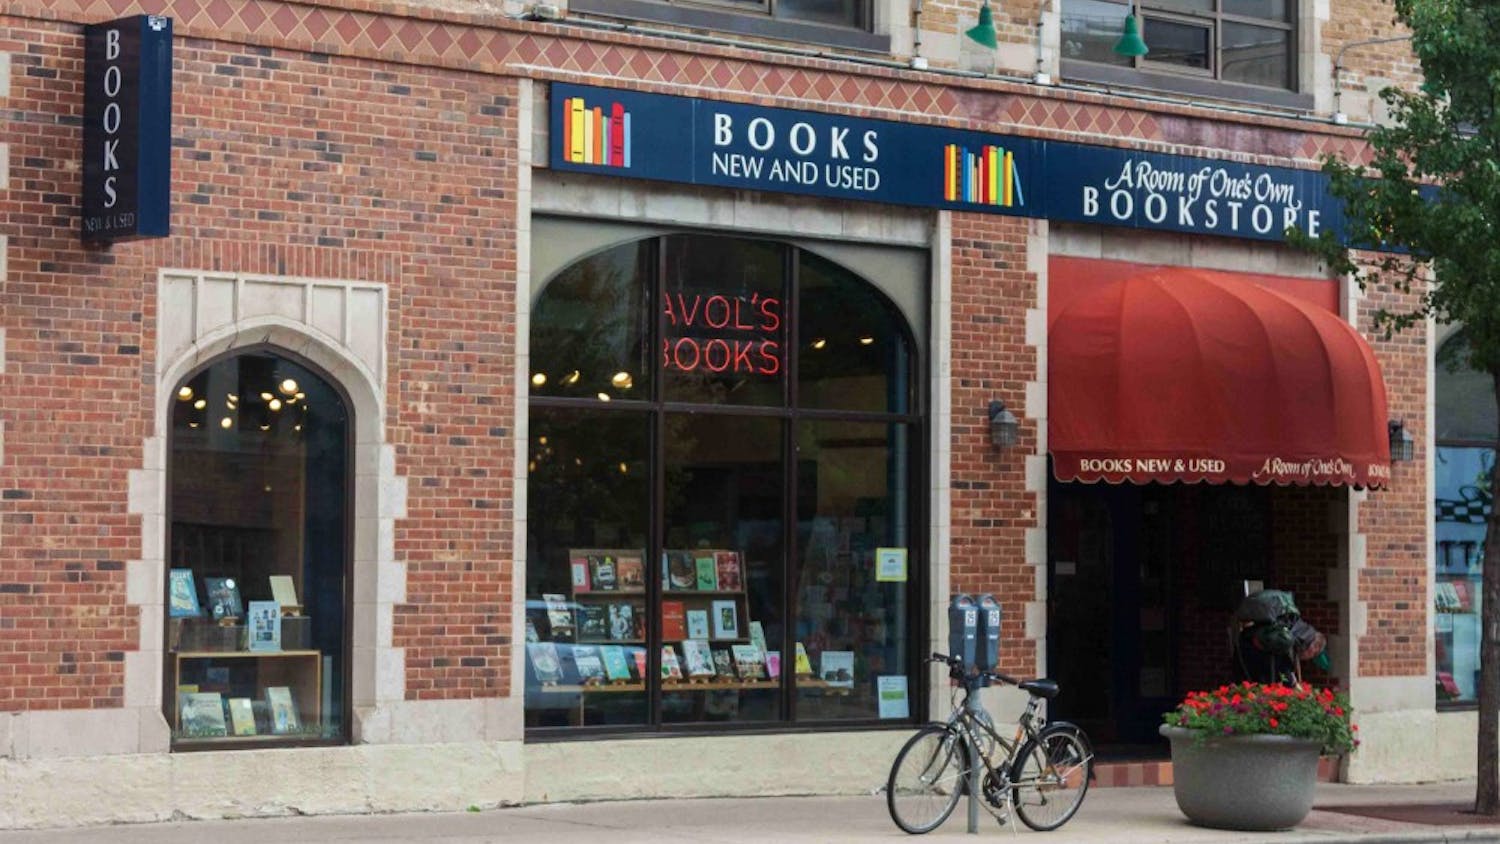 The owners of A Room of One’s Own, Madison’s independent feminist bookstore, announced in 2016 they are looking to sell their business.